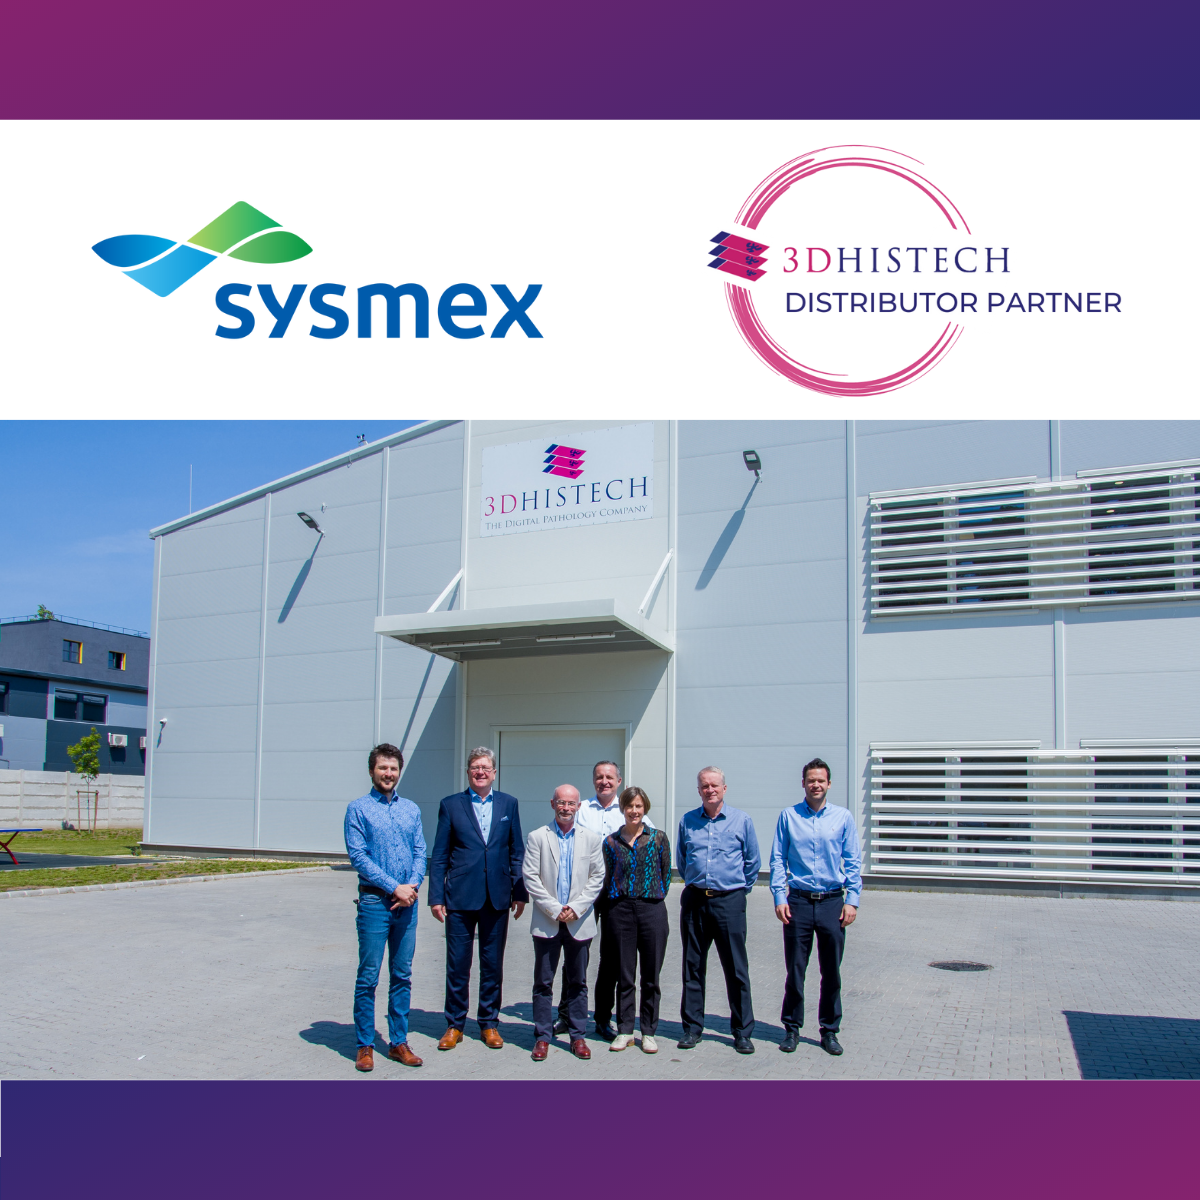 Sysmex UK & 3DHISTECH